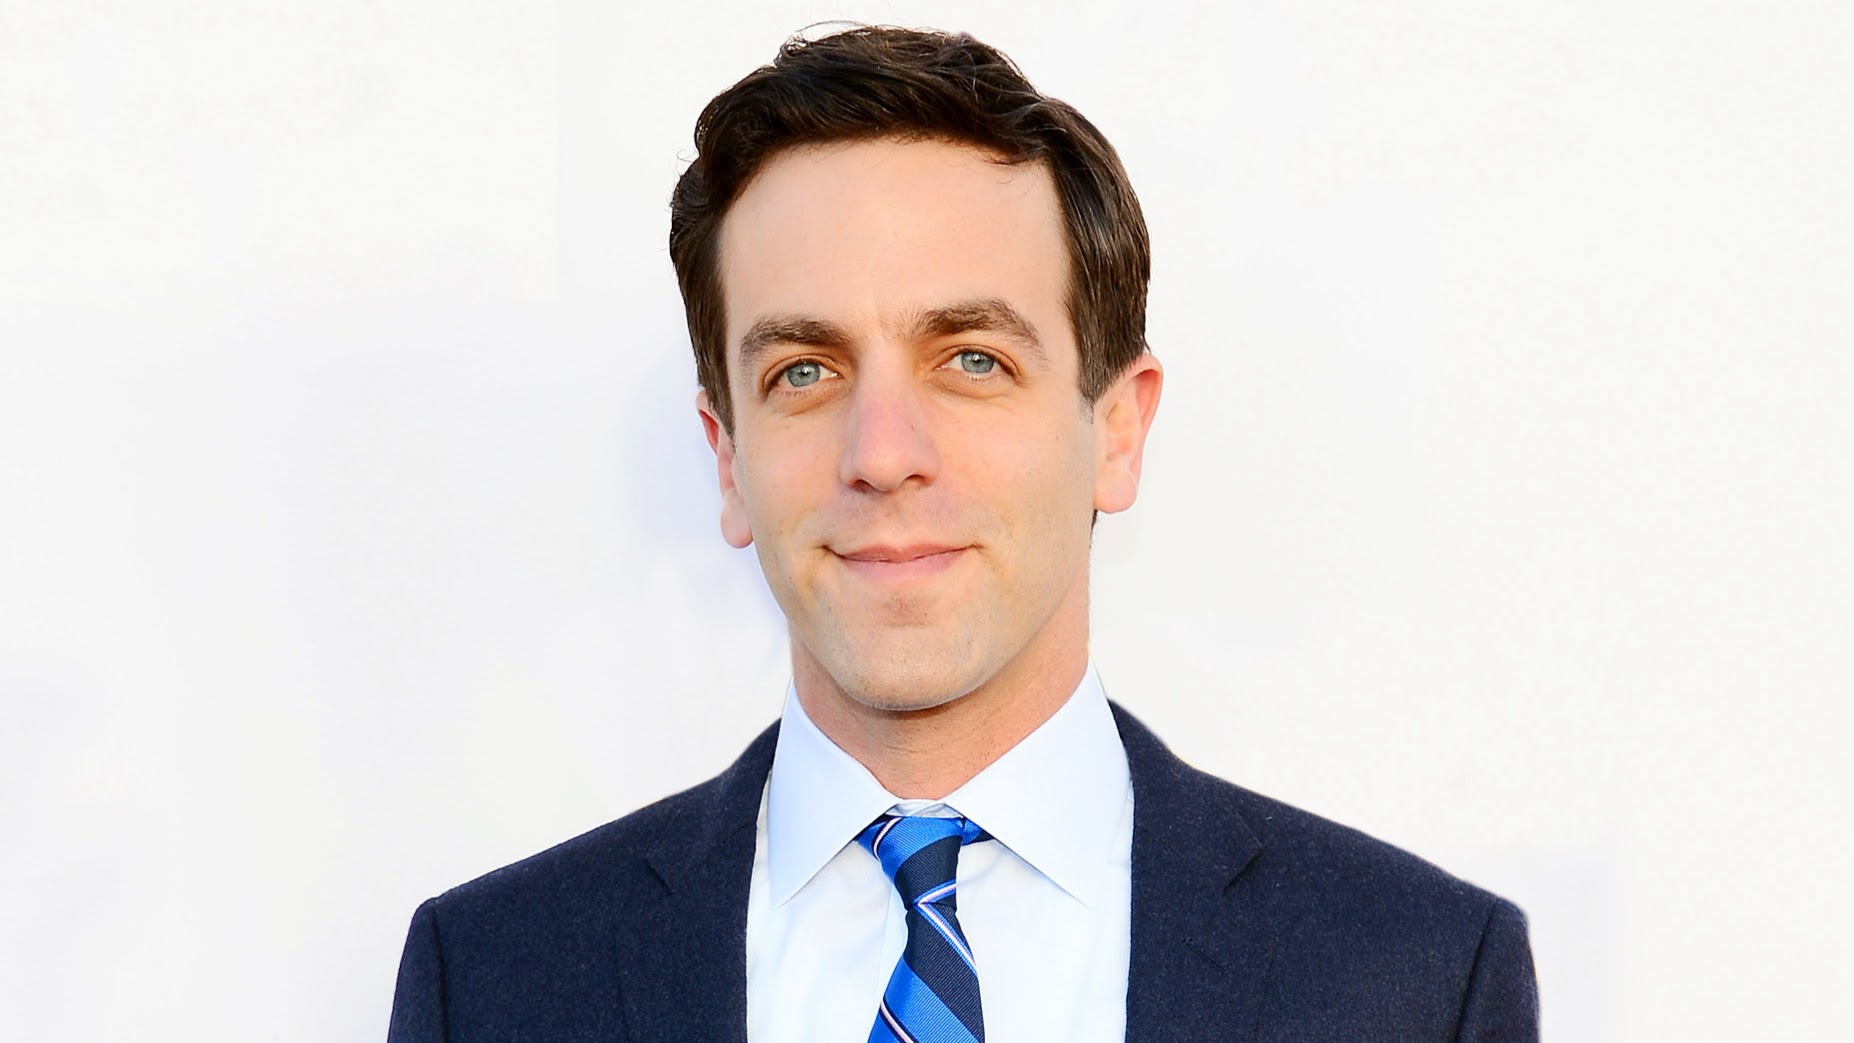 BJ Novak talked about his relationship with Mindy Kaling as well as other t...